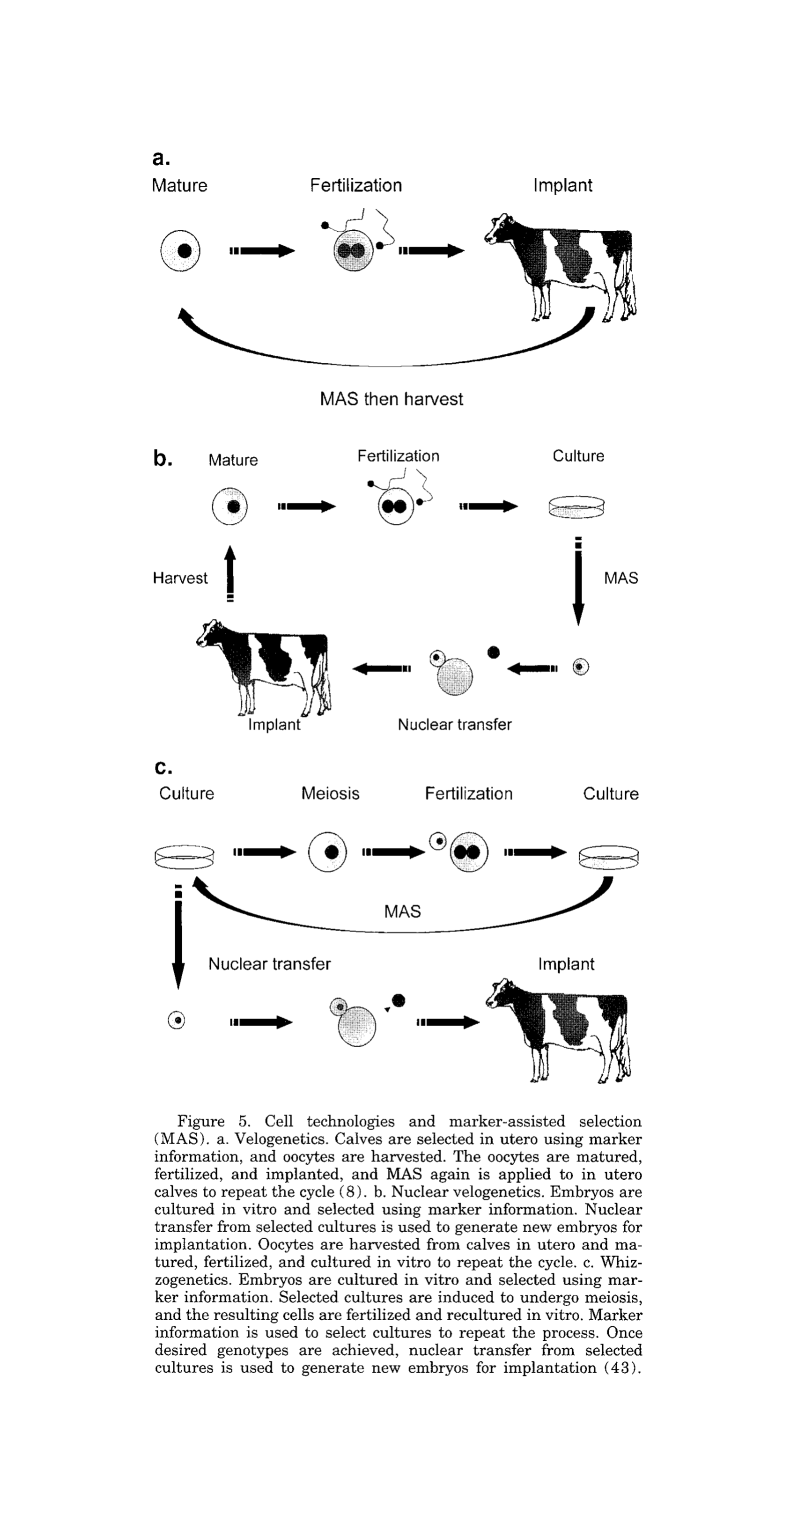 Figure 5. Cell technologies and marker-assisted selection (MAS). (a). “Velogenetics”. Calves are selected in utero using marker information, and oocytes are harvested. The oocytes are matured, fertilized, and implanted, and MAS again is applied to in utero calves to repeat the cycle (8). (b). “Nuclear velogenetics”. Embryos are cultured in vitro and selected using marker information. Nuclear transfer from selected cultures is used to generate new embryos for implantation. Oocytes are harvested from calves in utero and matured, fertilized, and cultured in vitro to repeat the cycle. (c). “Whizzogenetics”. Embryos are cultured in vitro and selected using marker information. Selected cultures are induced to undergo meiosis, and the resulting cells are fertilized and recultured in vitro. Marker information is used to select cultures to repeat the process. Once desired genotypes are achieved, nuclear transfer from selected cultures is used to generate new embryos for implantation (43).